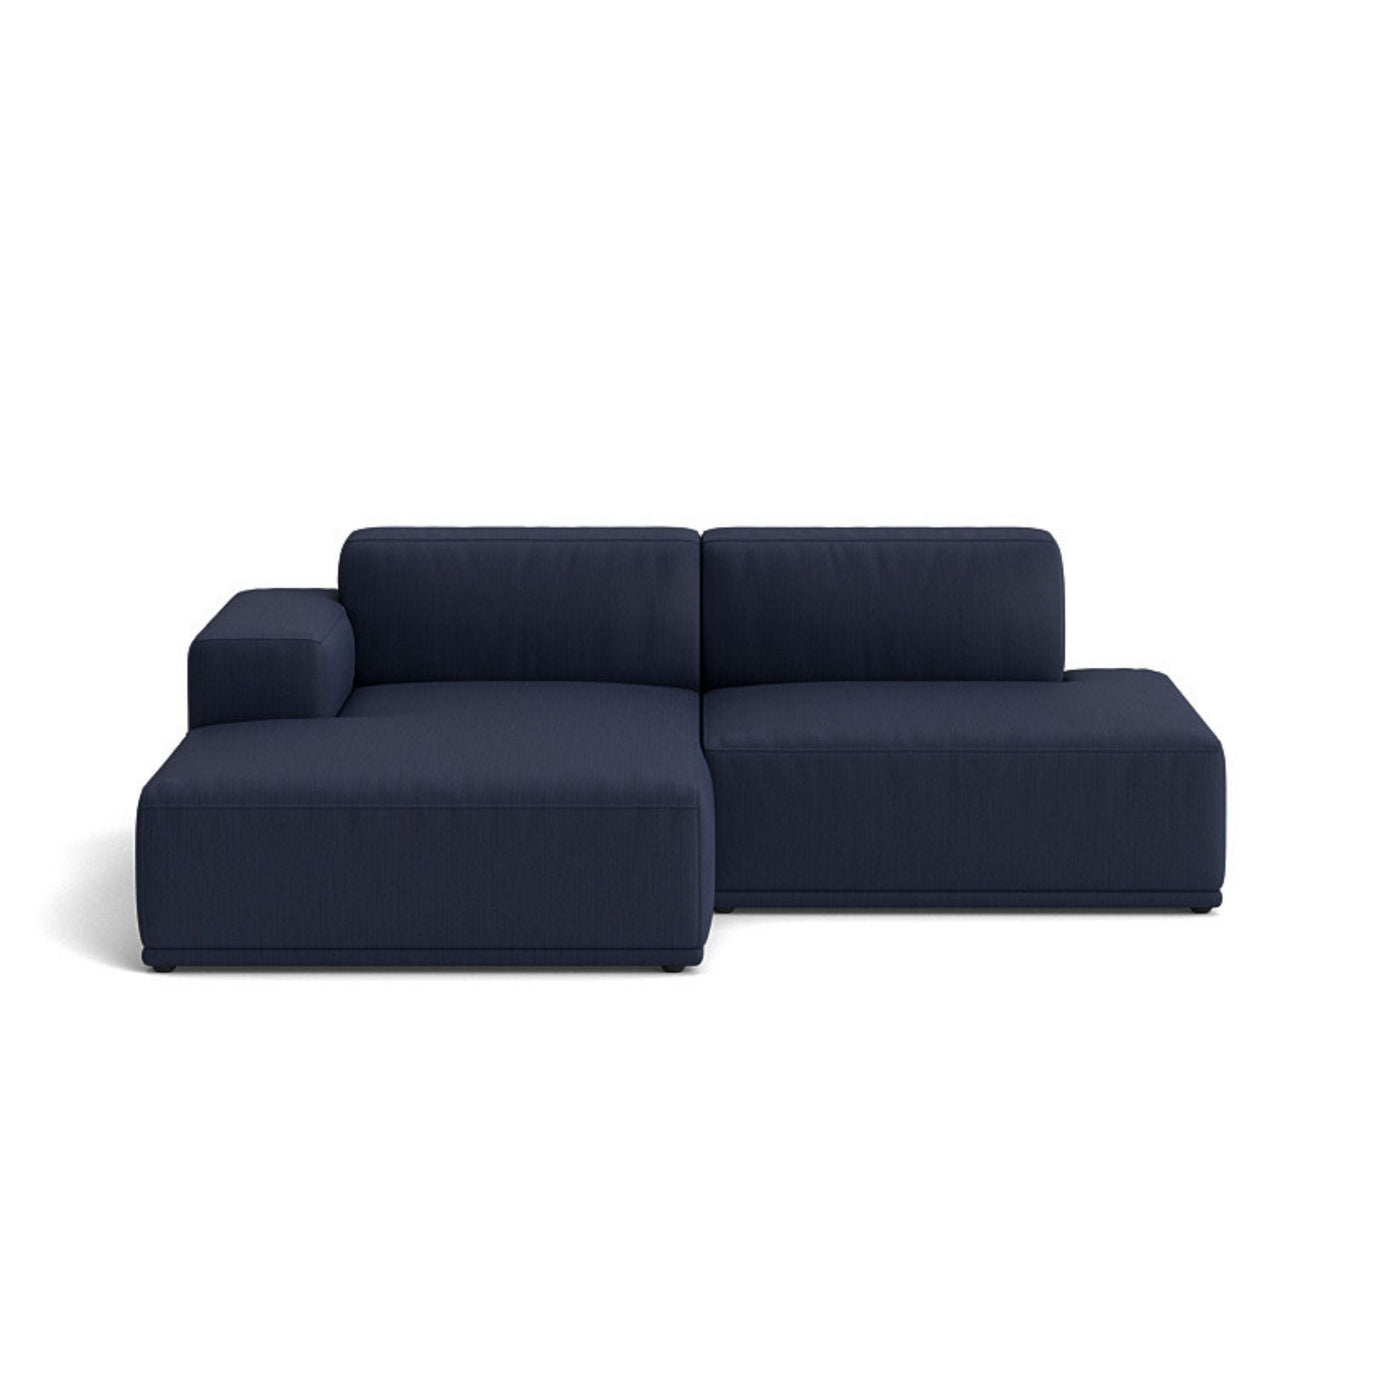 Muuto Connect Soft Modular 2 Seater Sofa, configuration 3. made-to-order from someday designs. #colour_balder-782